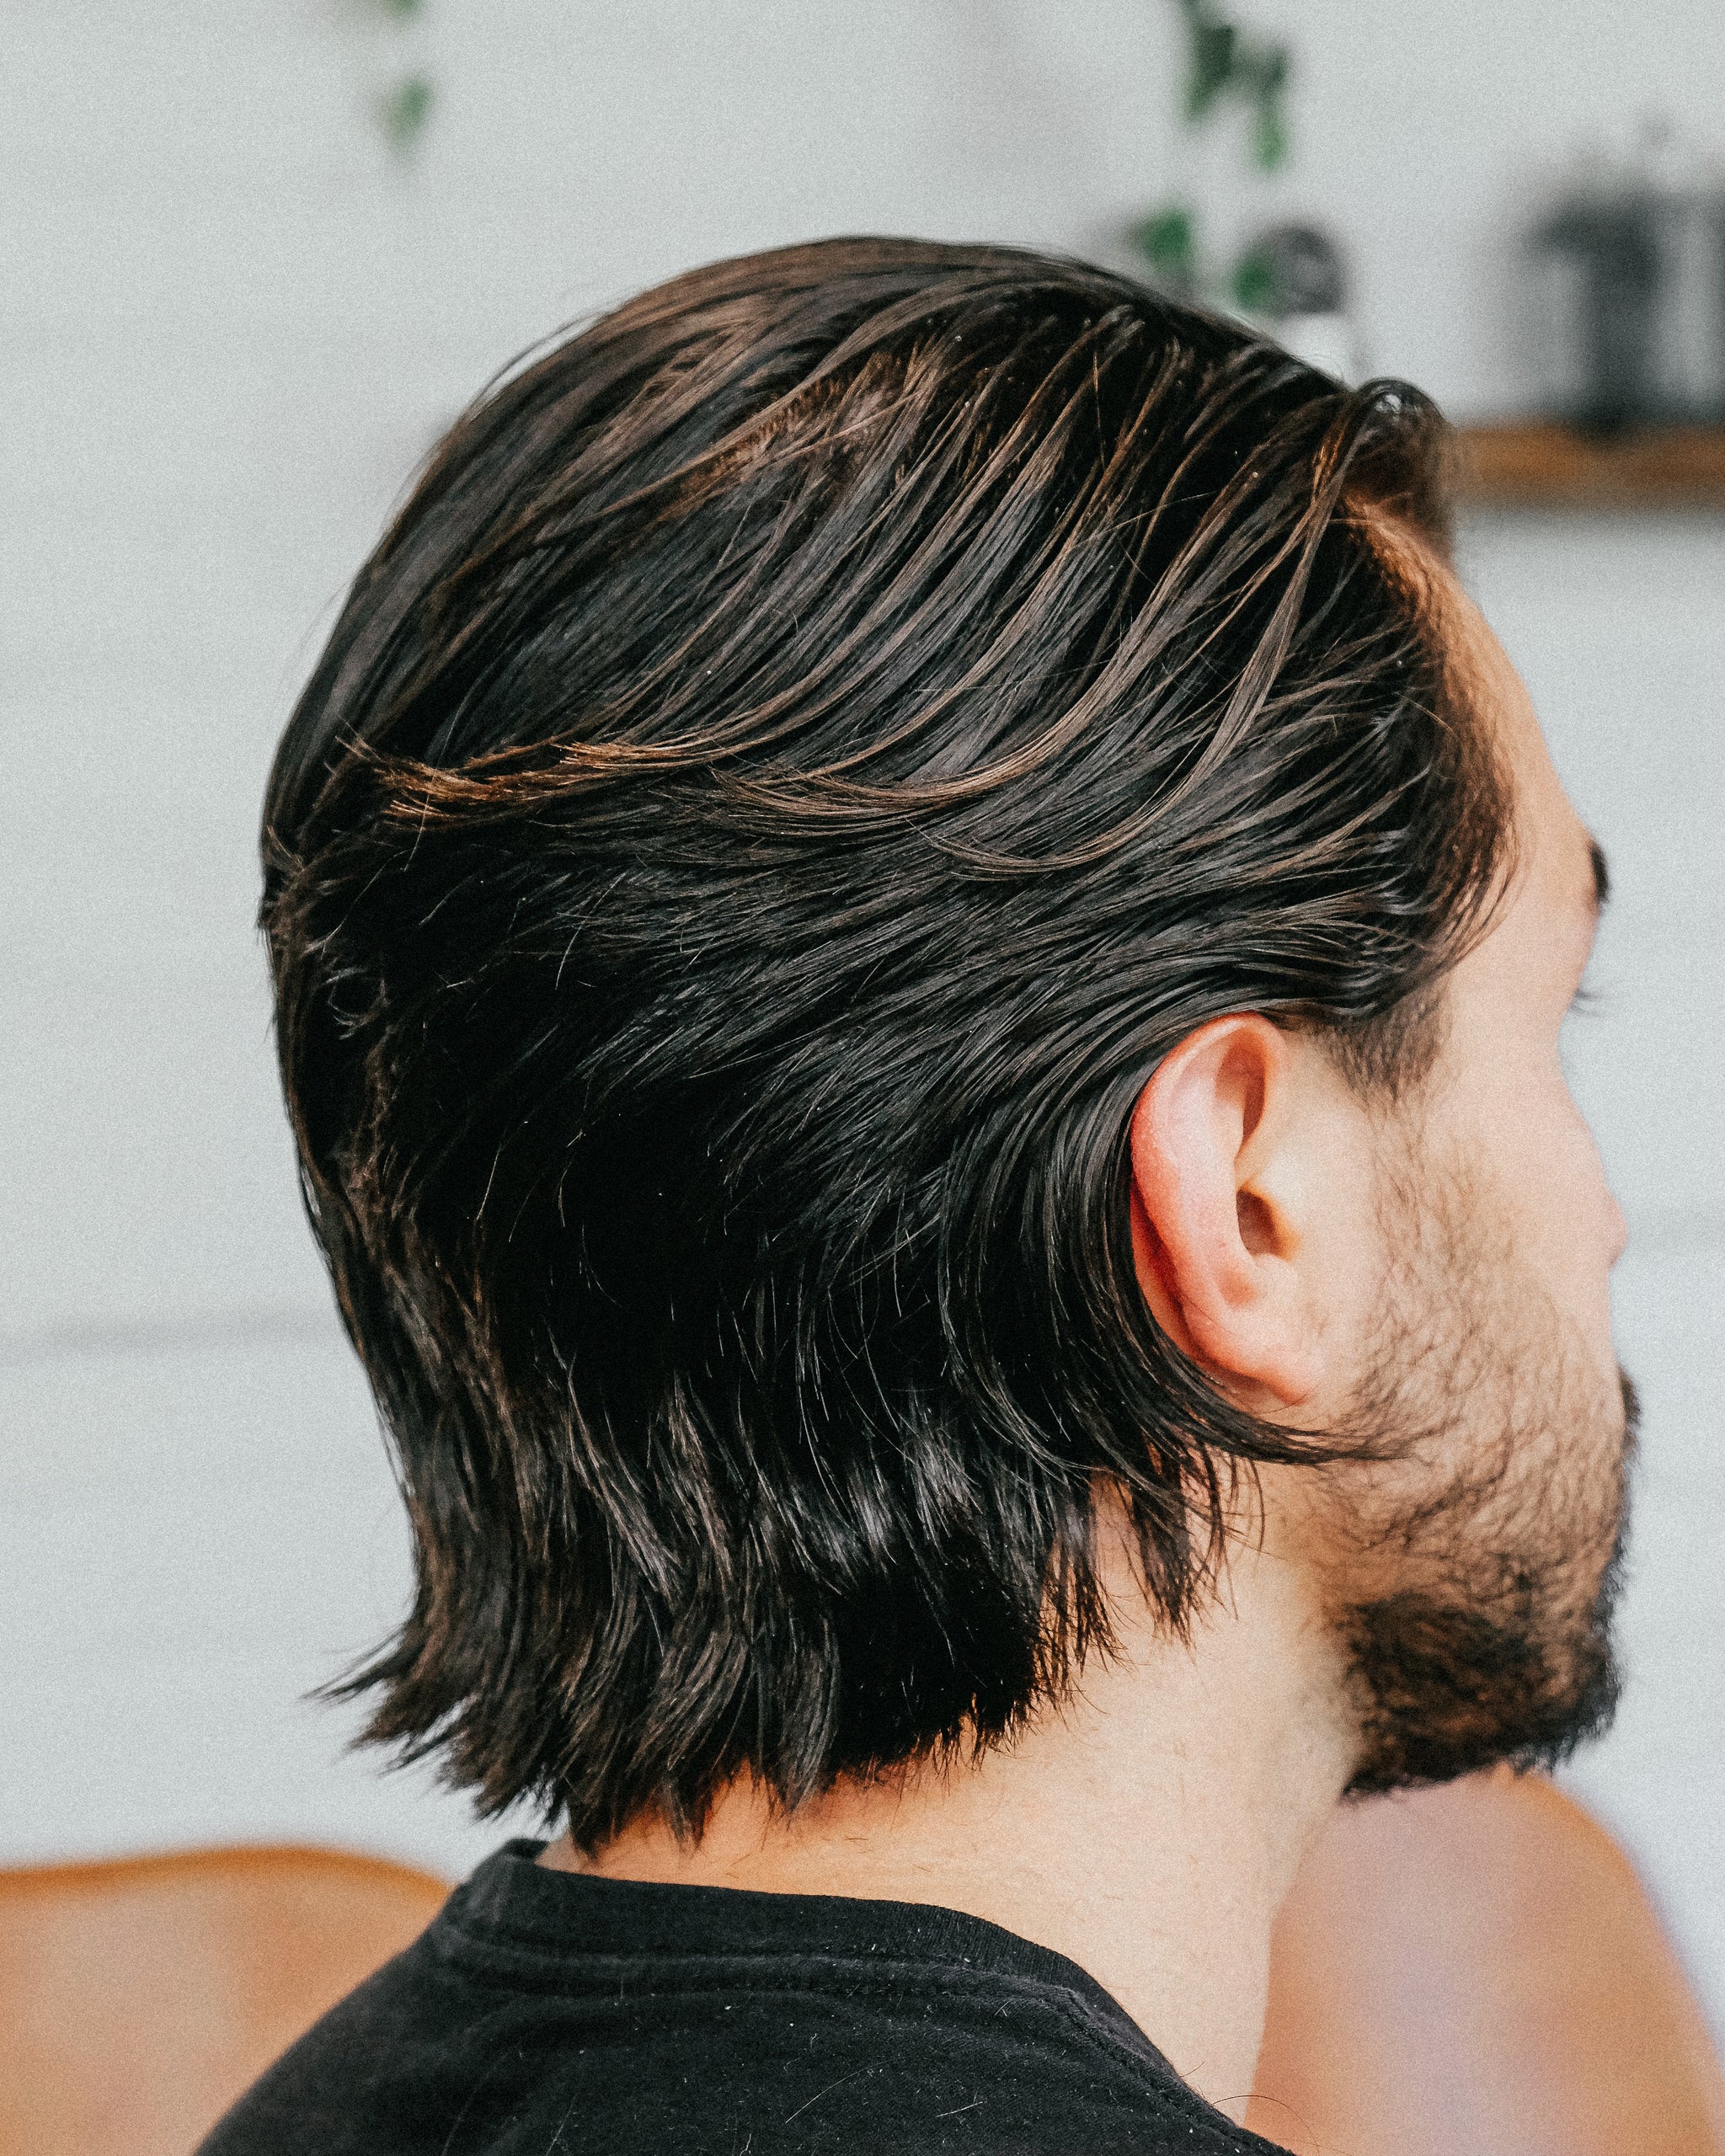 How to Grow Out Your Hair: Tips and Tricks to get through the awkward phase.